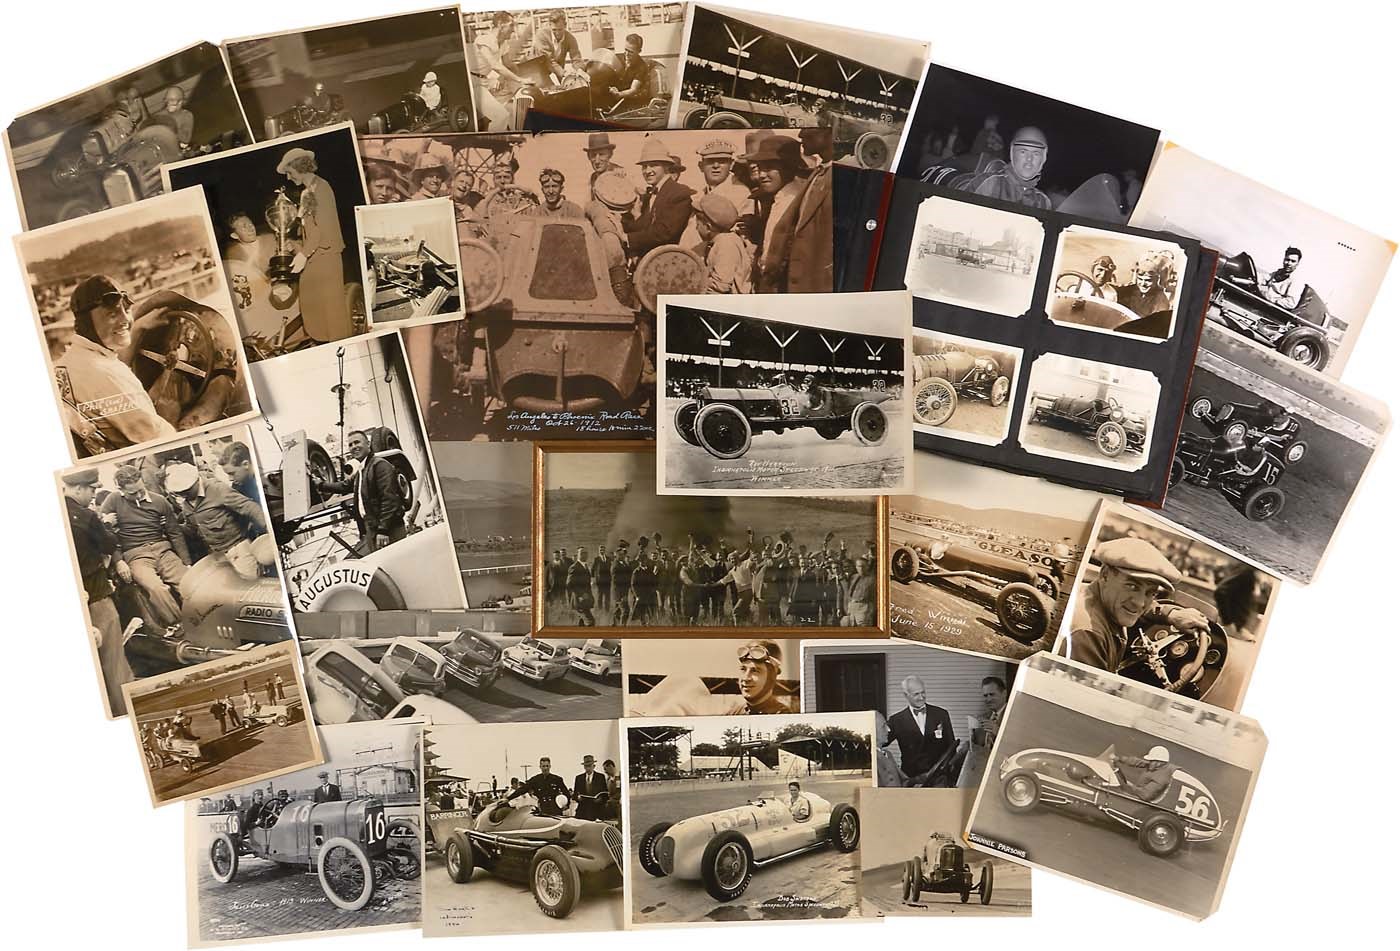 - 1900s-60s Early Auto Racing Photograph Collection (700+)